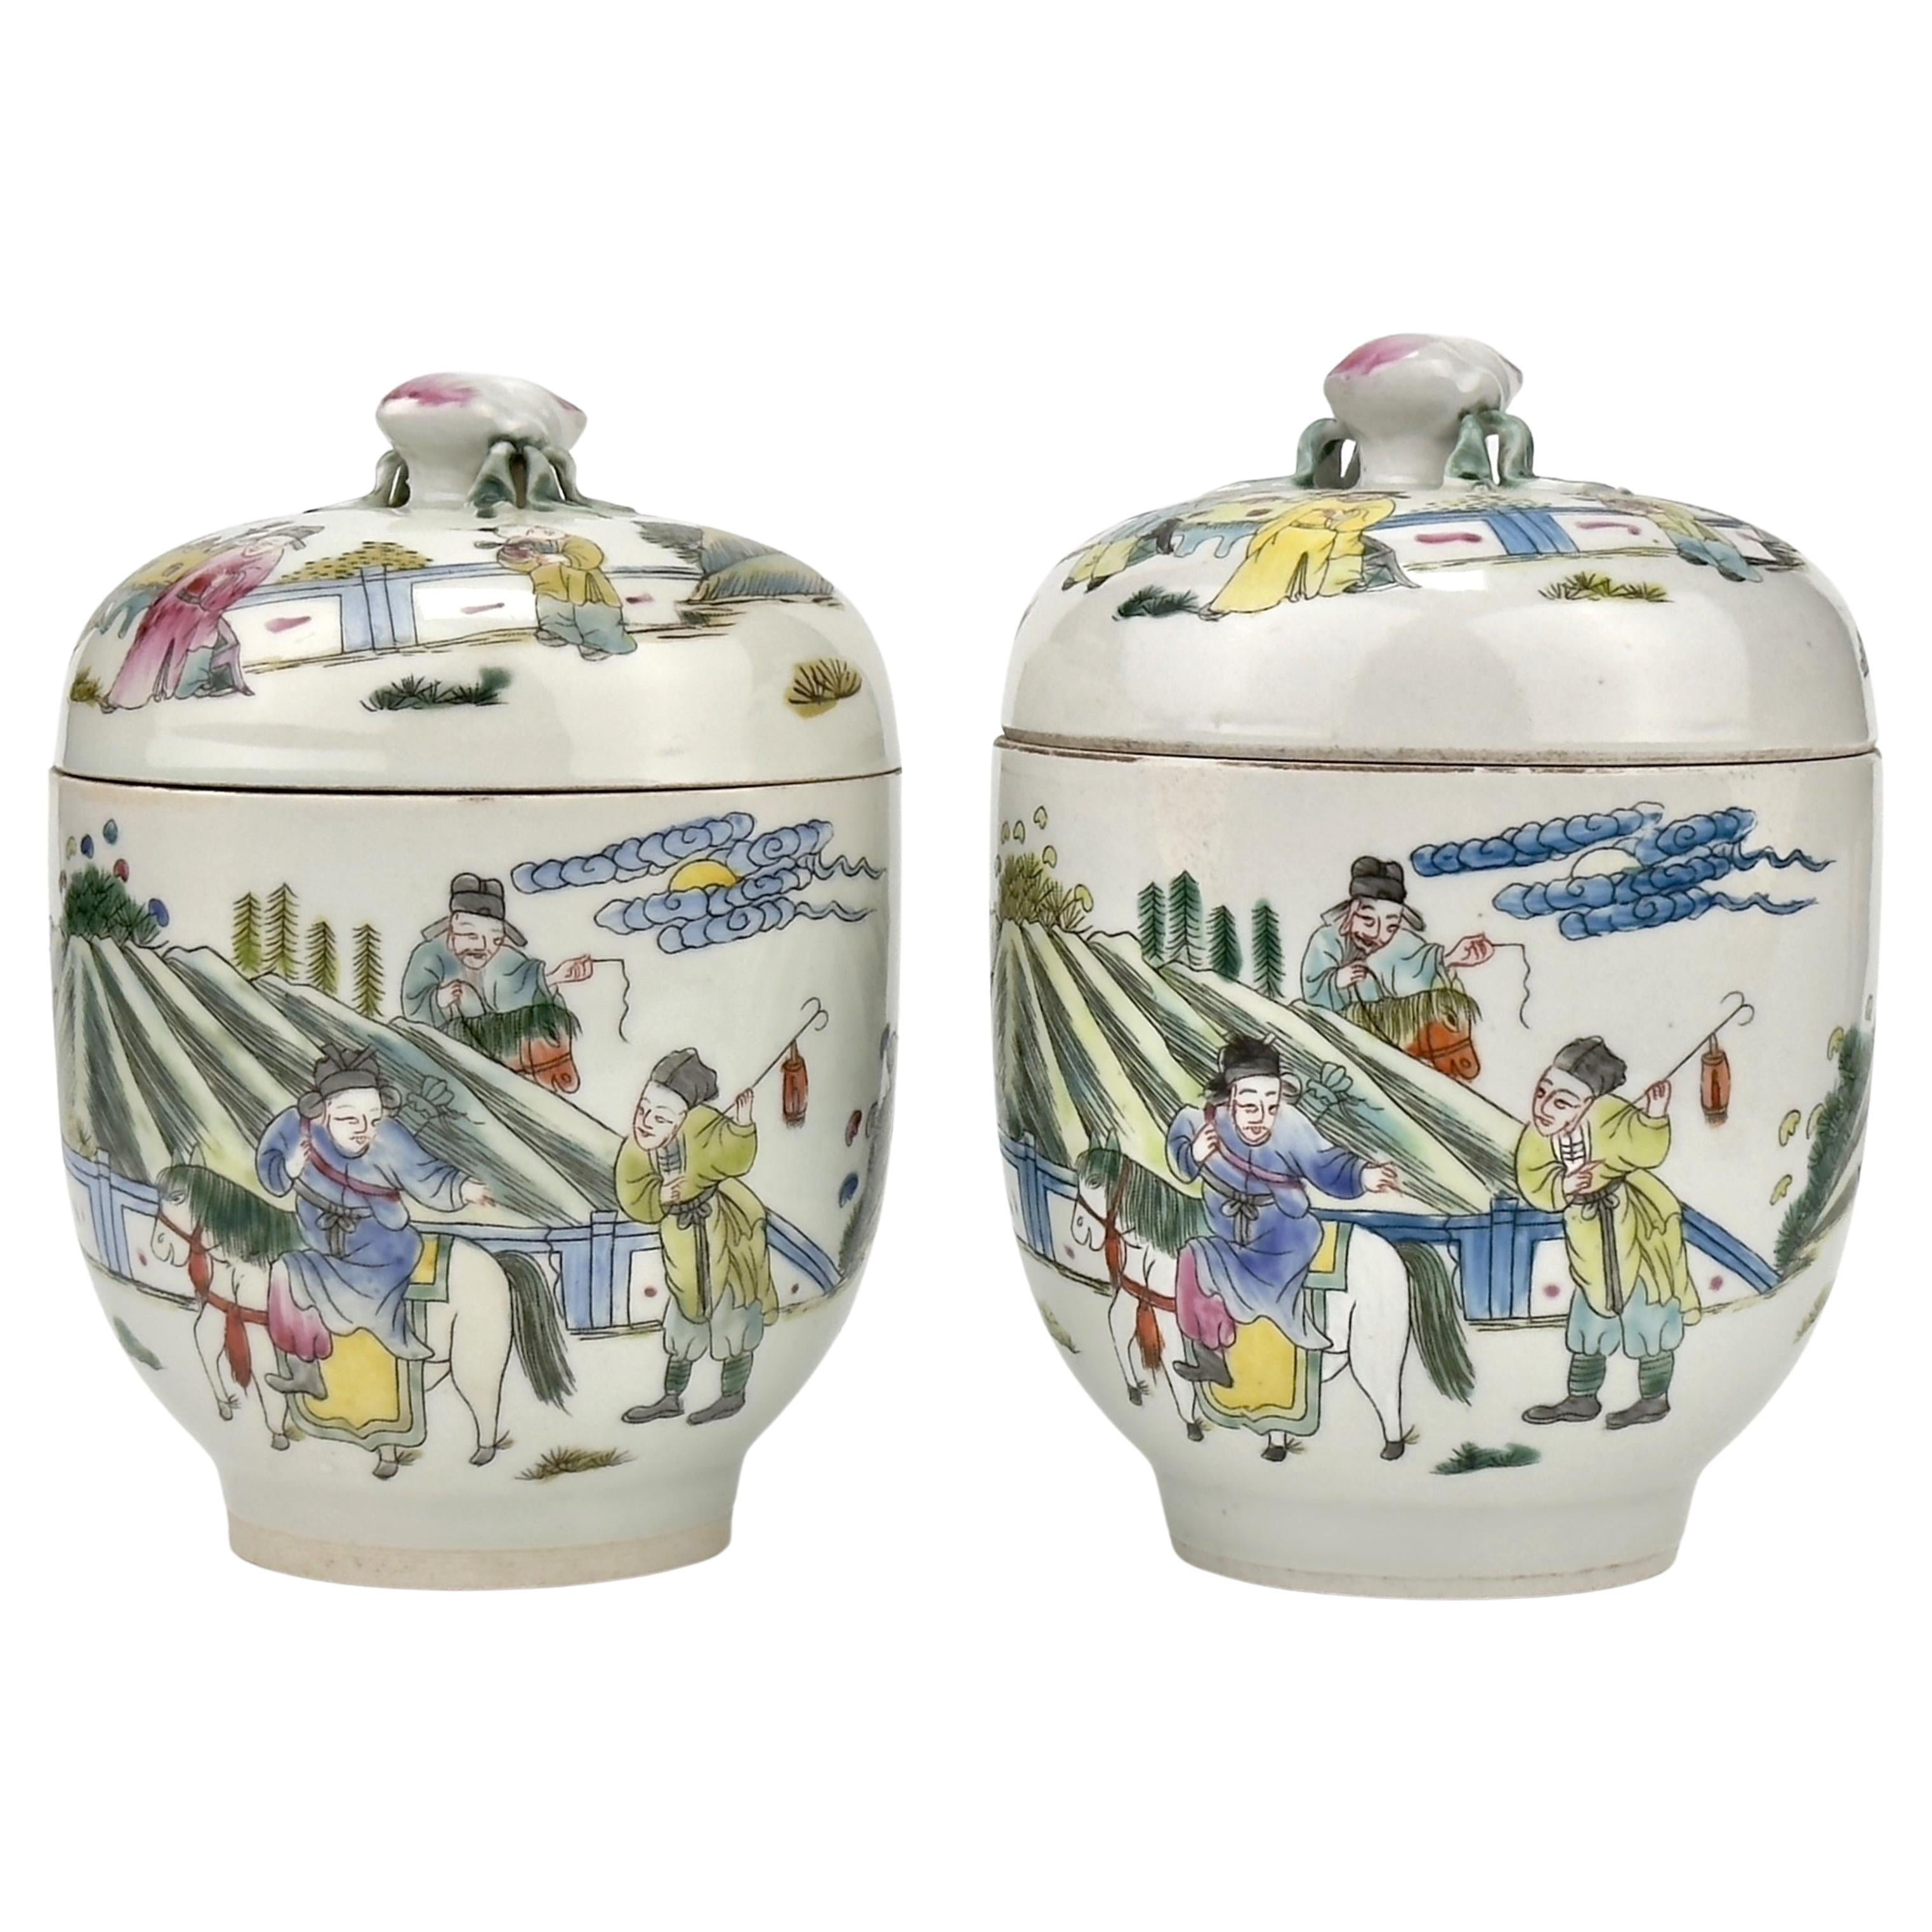 Two Chinese Famille Verte Jars with Horseback Riding, Qing Period, Tongzhi Era For Sale